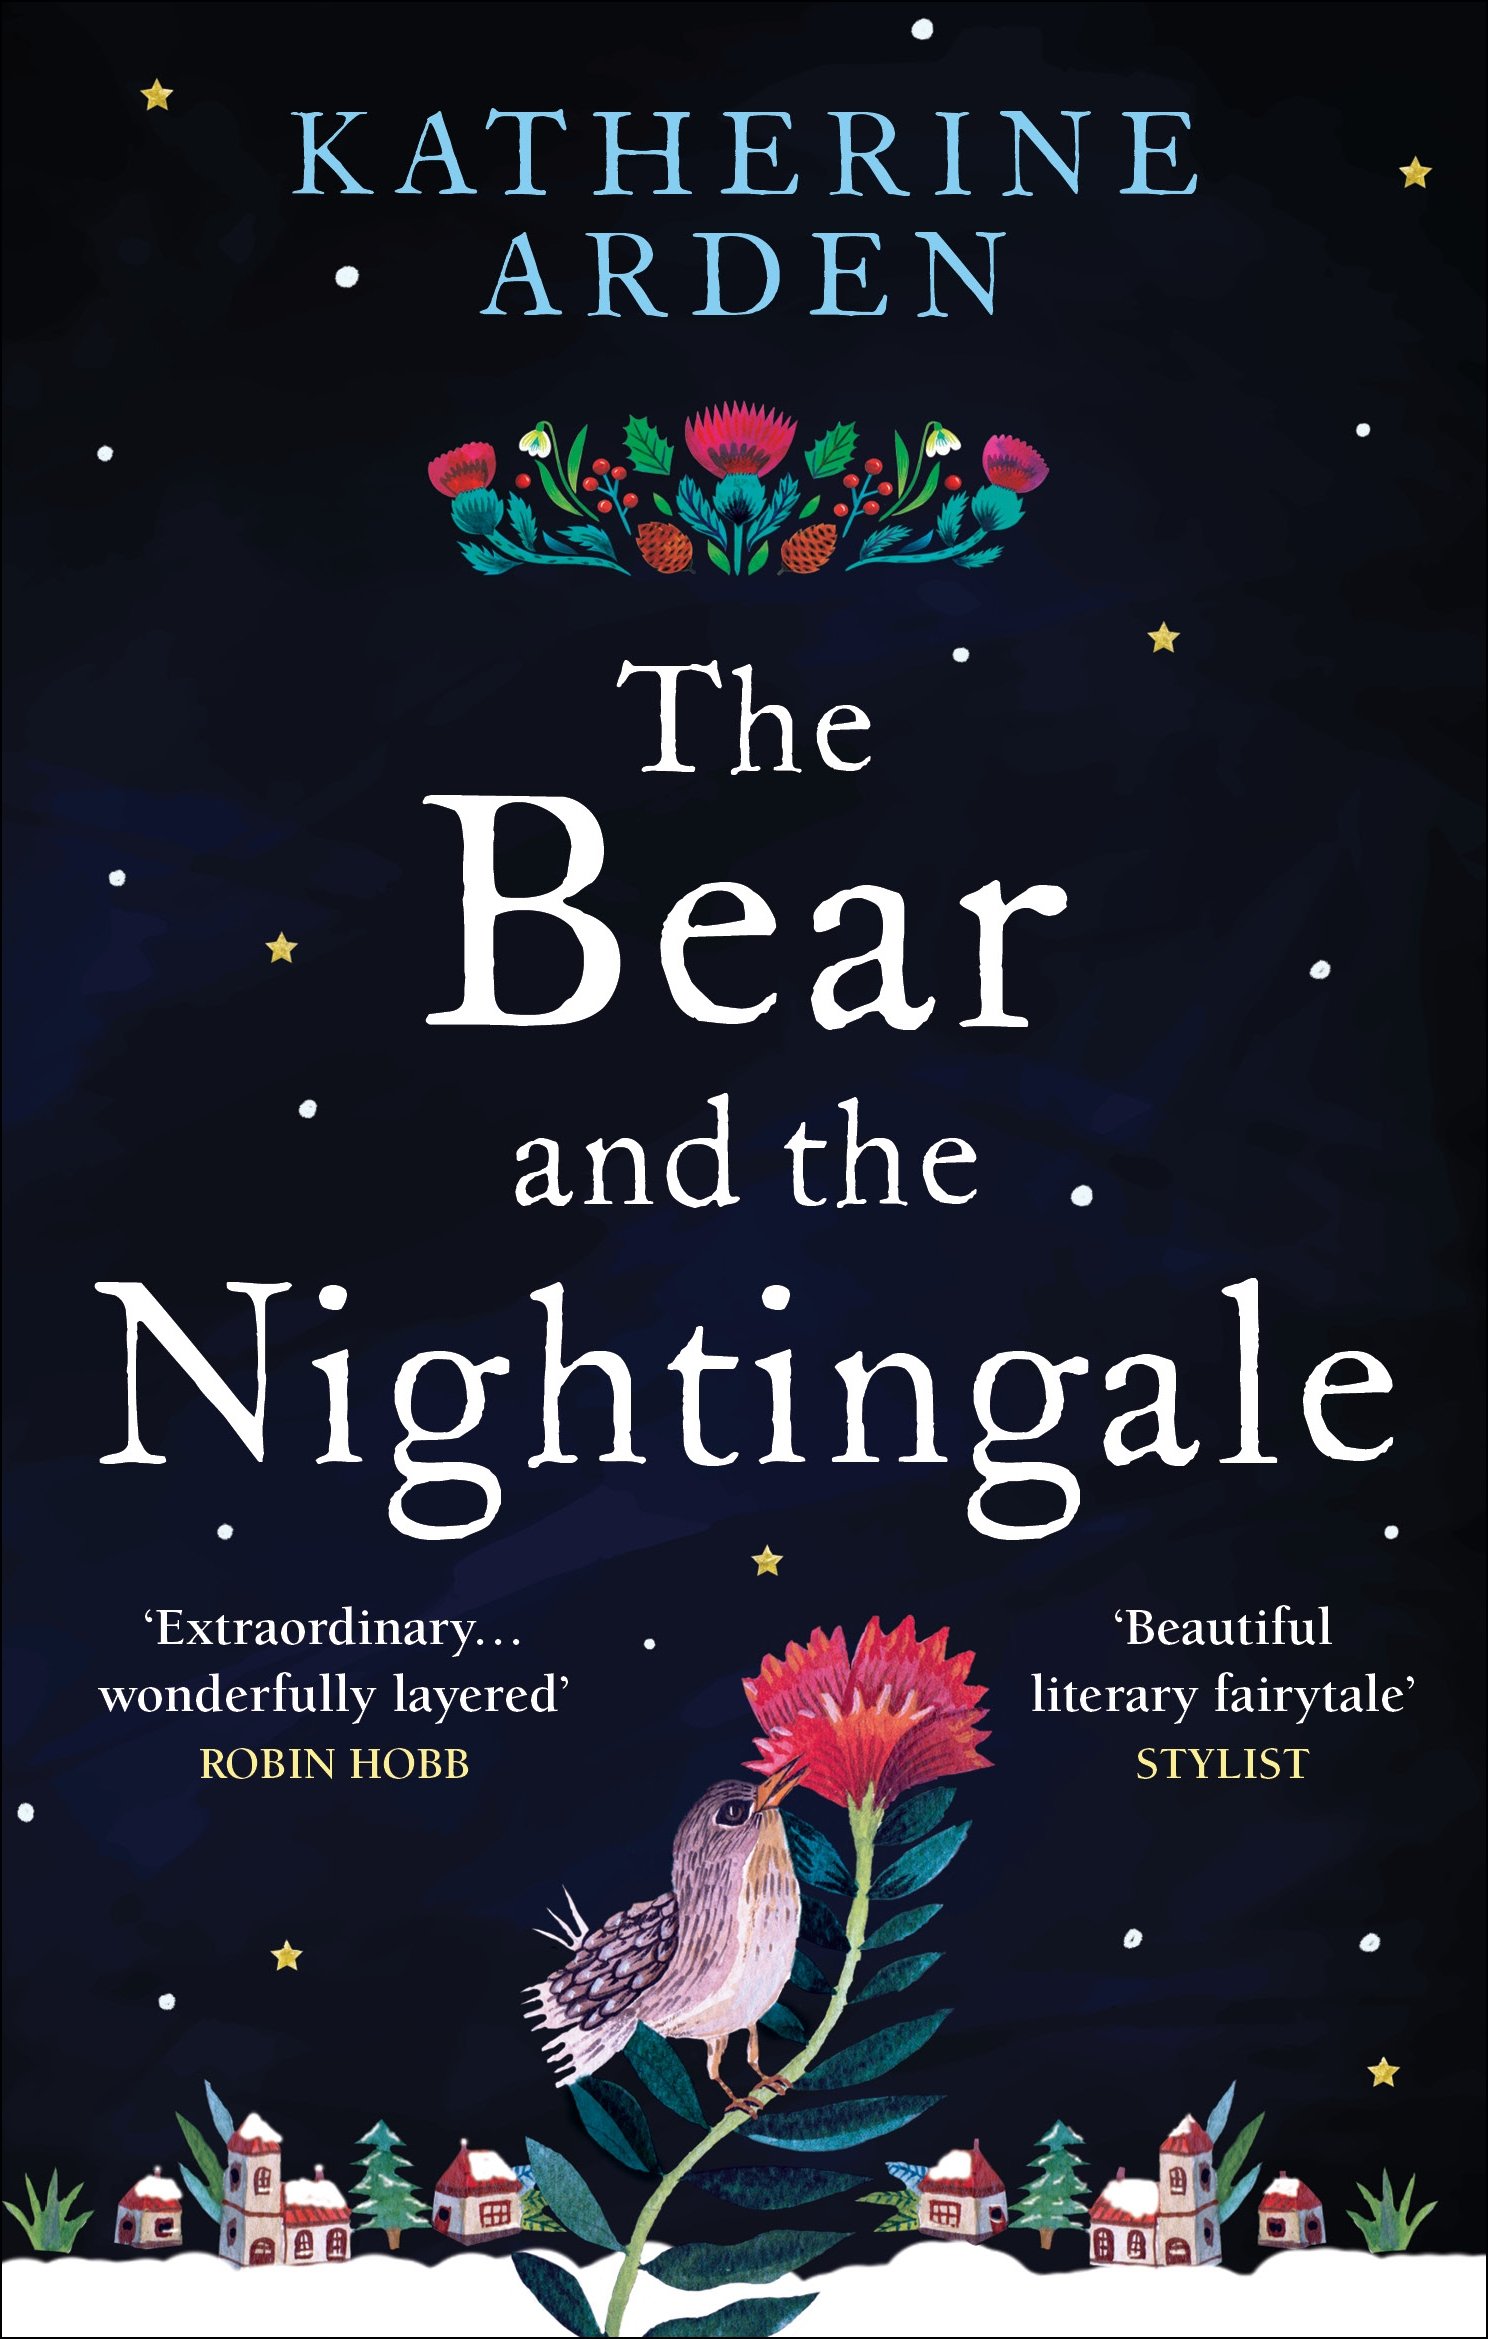 The Bear and The Nightingale | Katherine Arden